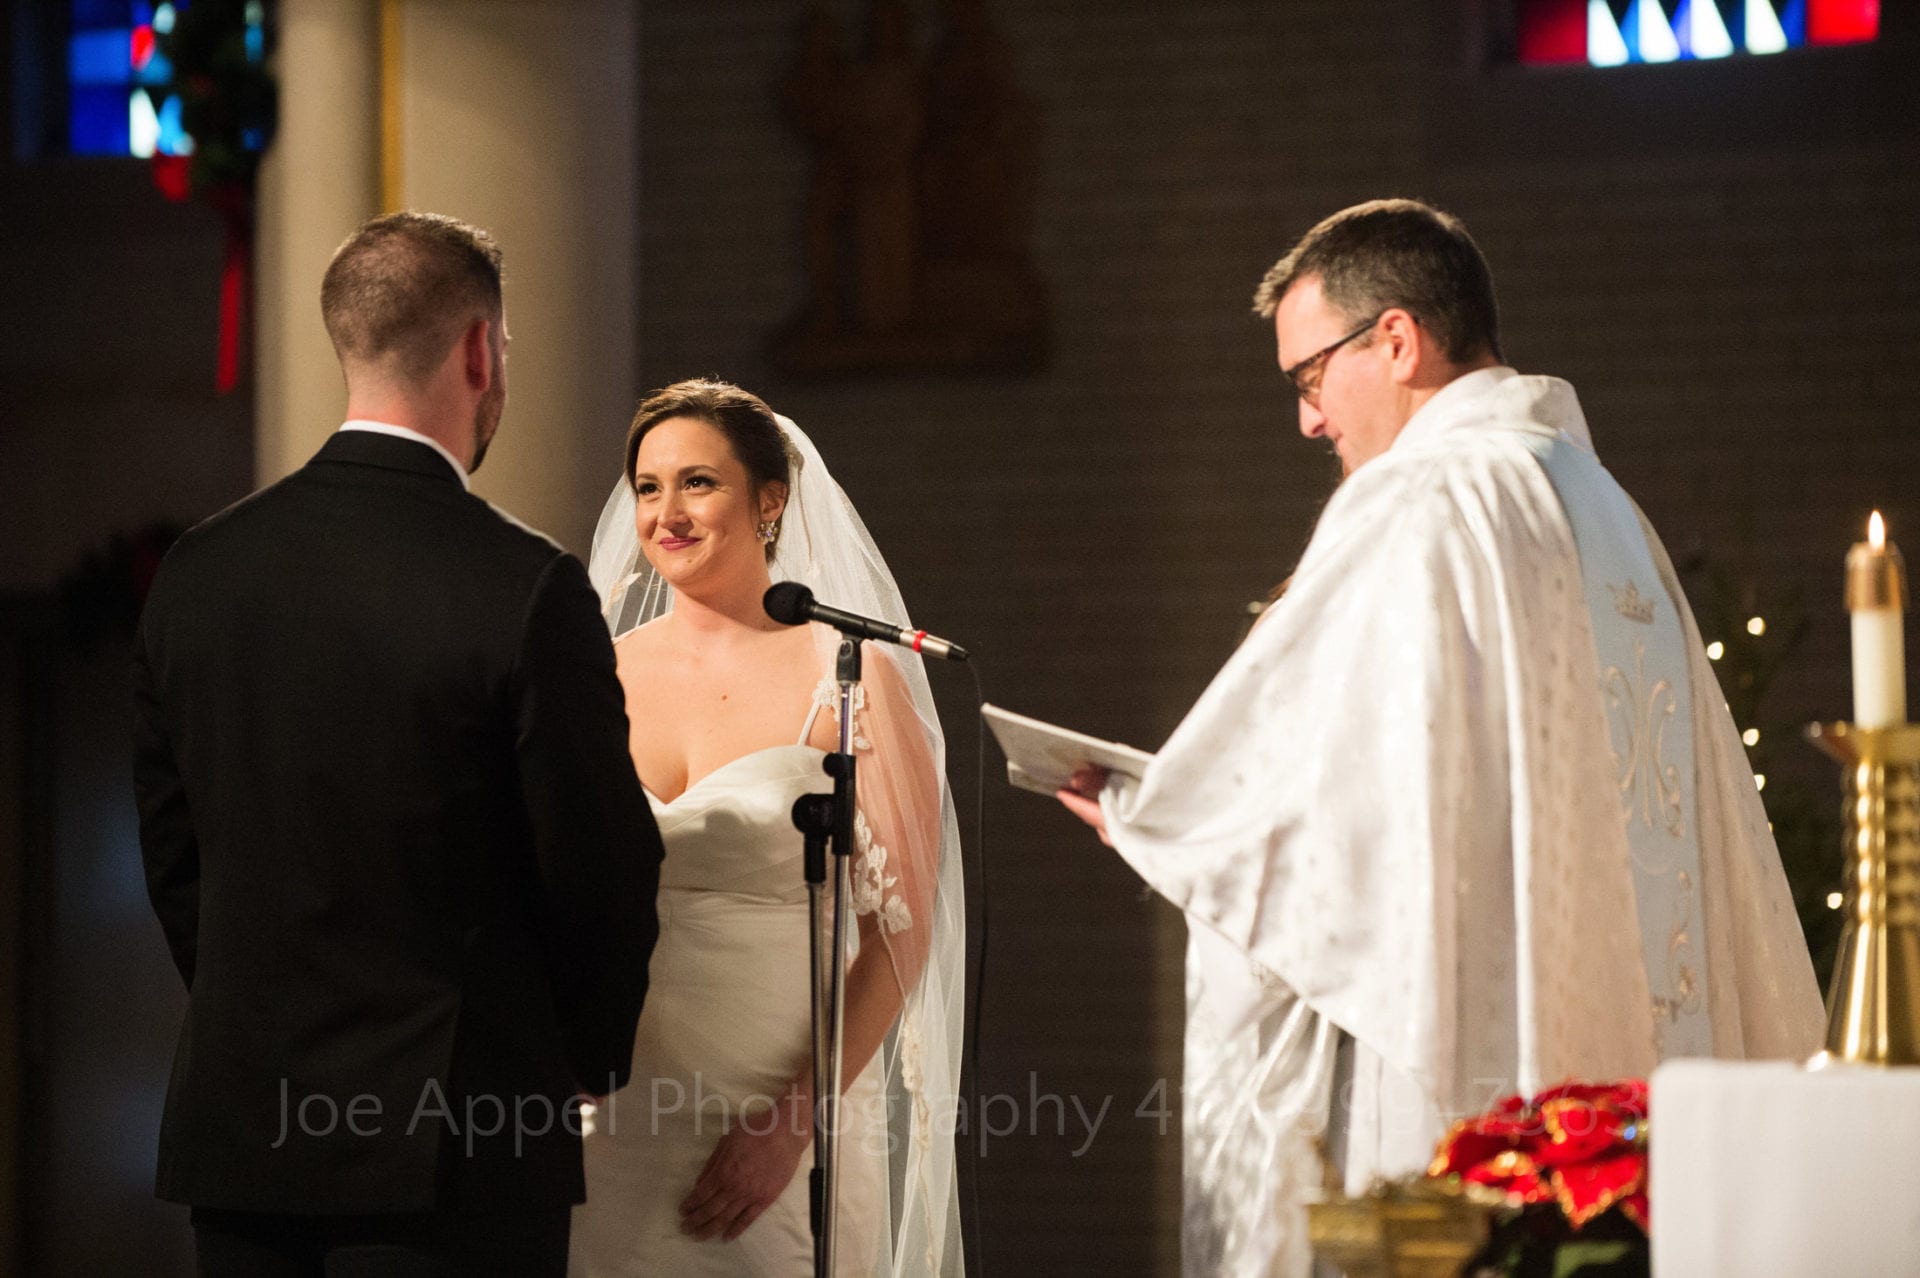 As the priest on the right side of the frame reads from a folder, a bride looks at her groom (his back to the camera) as she holds his hands while exchanging vows.